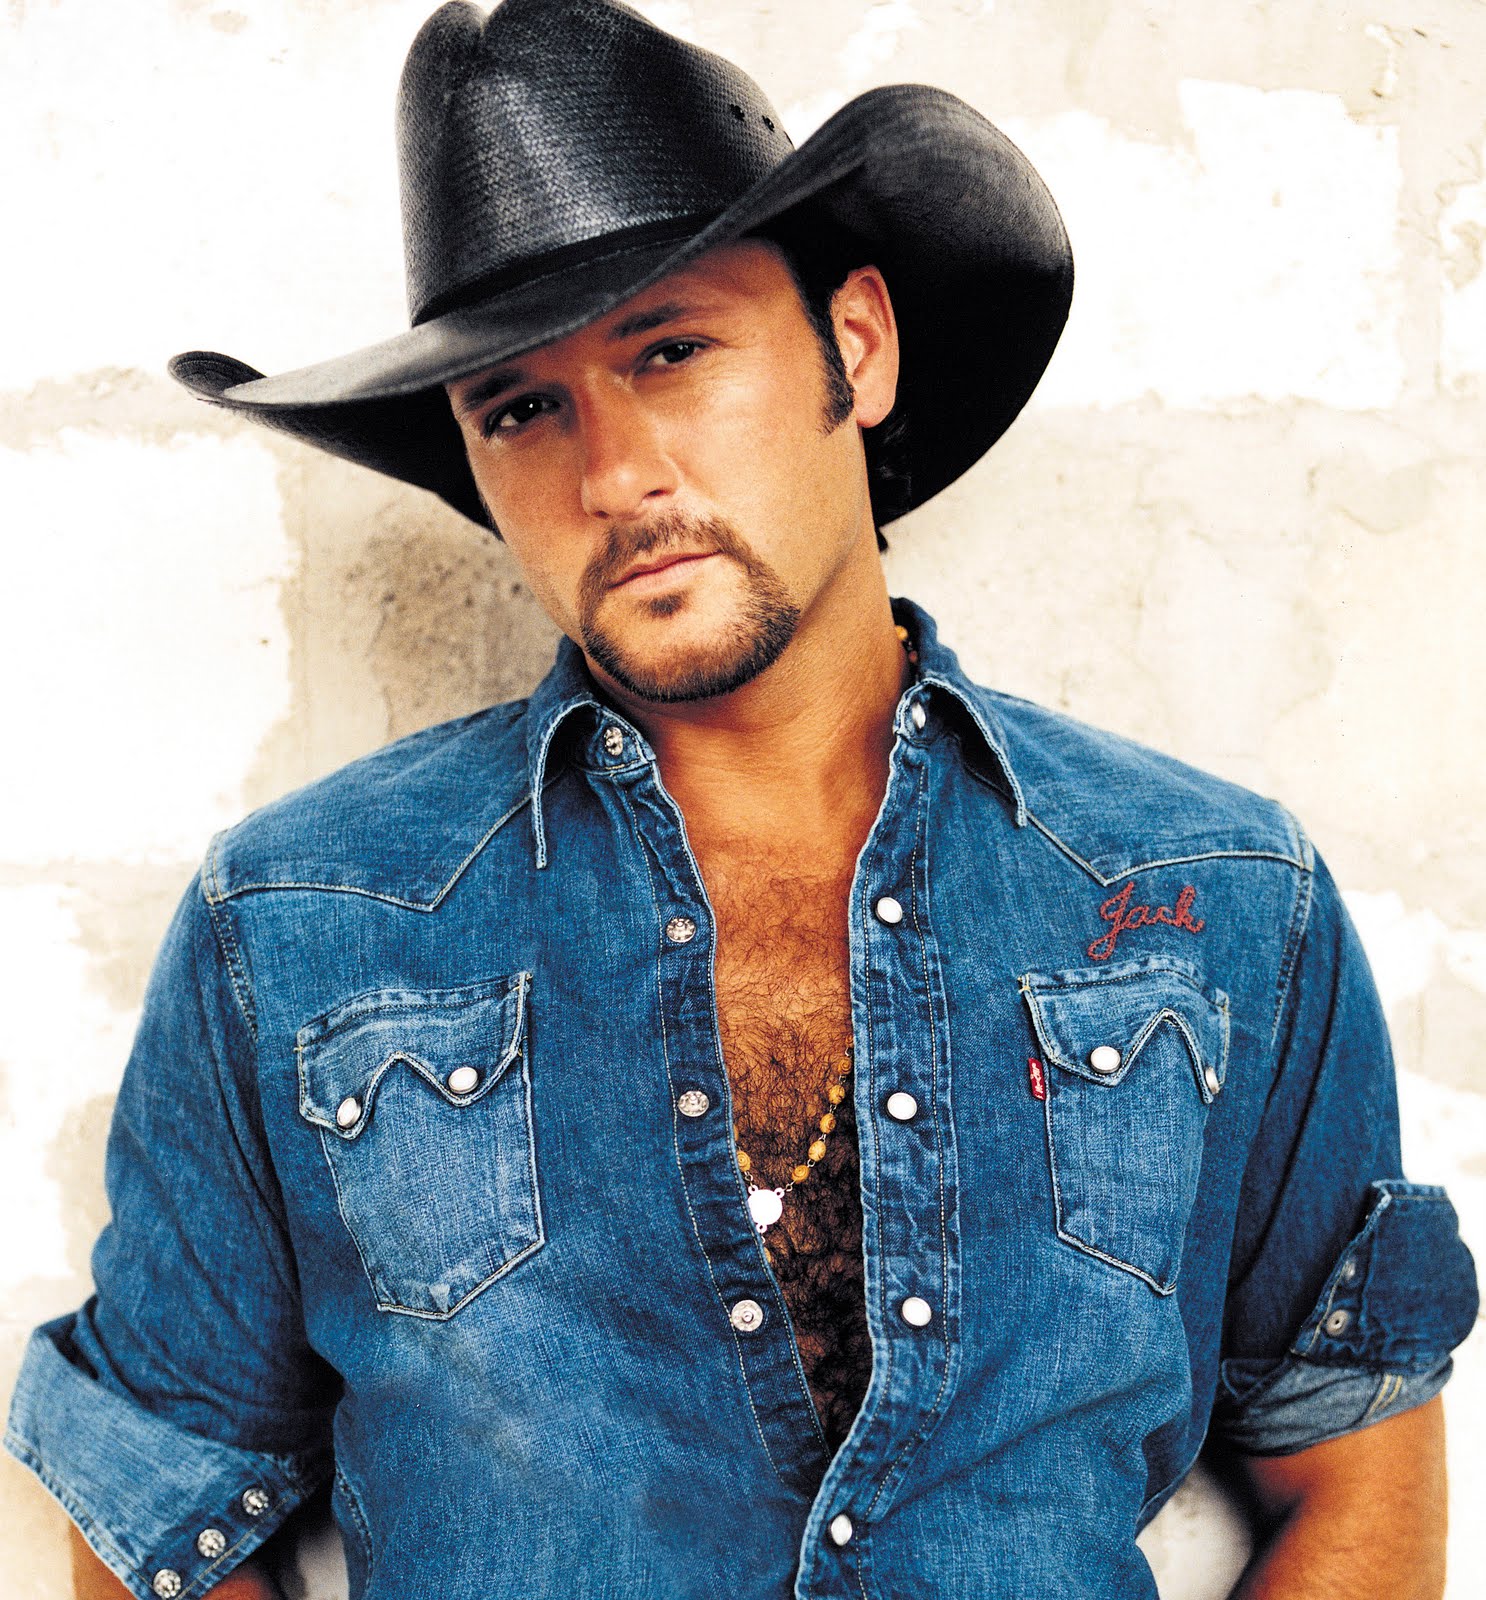 Male Celeb Fakes - Best of the Net: Tim McGraw American Country Singer1486 x 1600